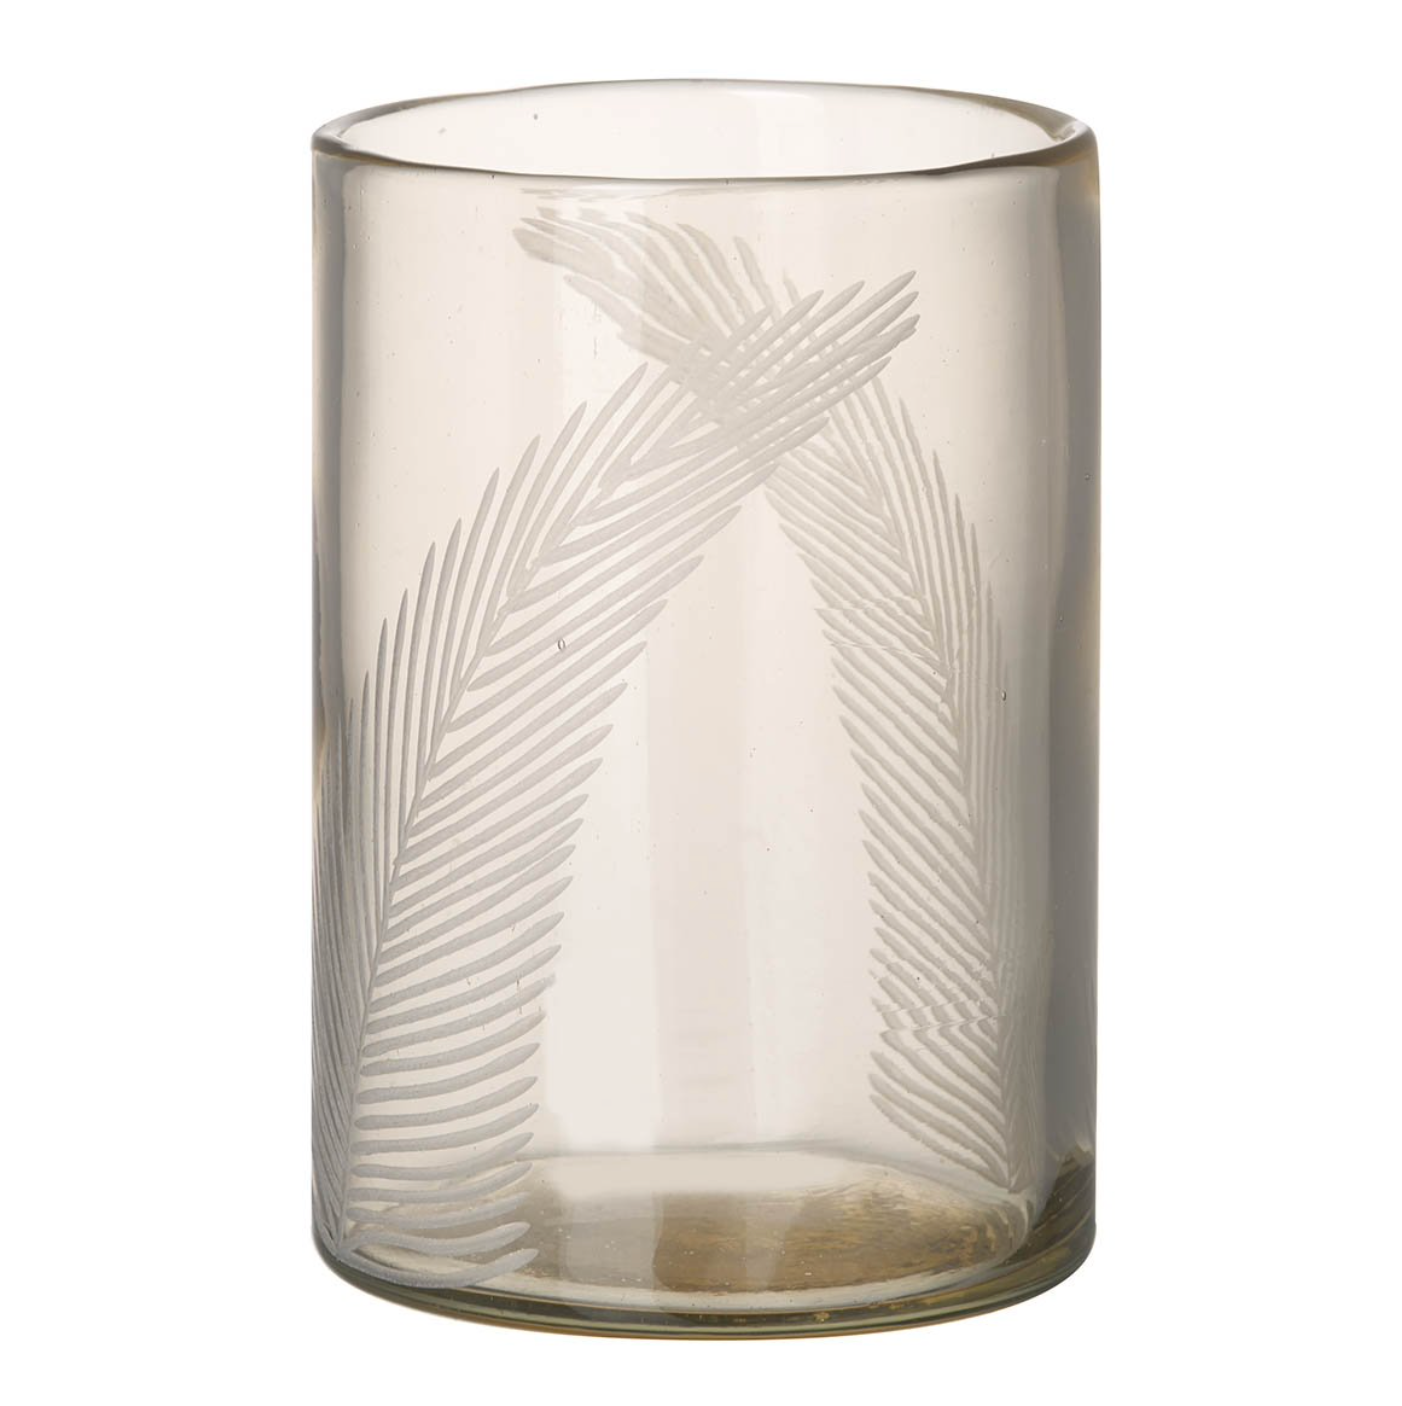 Parlane Living Itched Fern Candle Holder